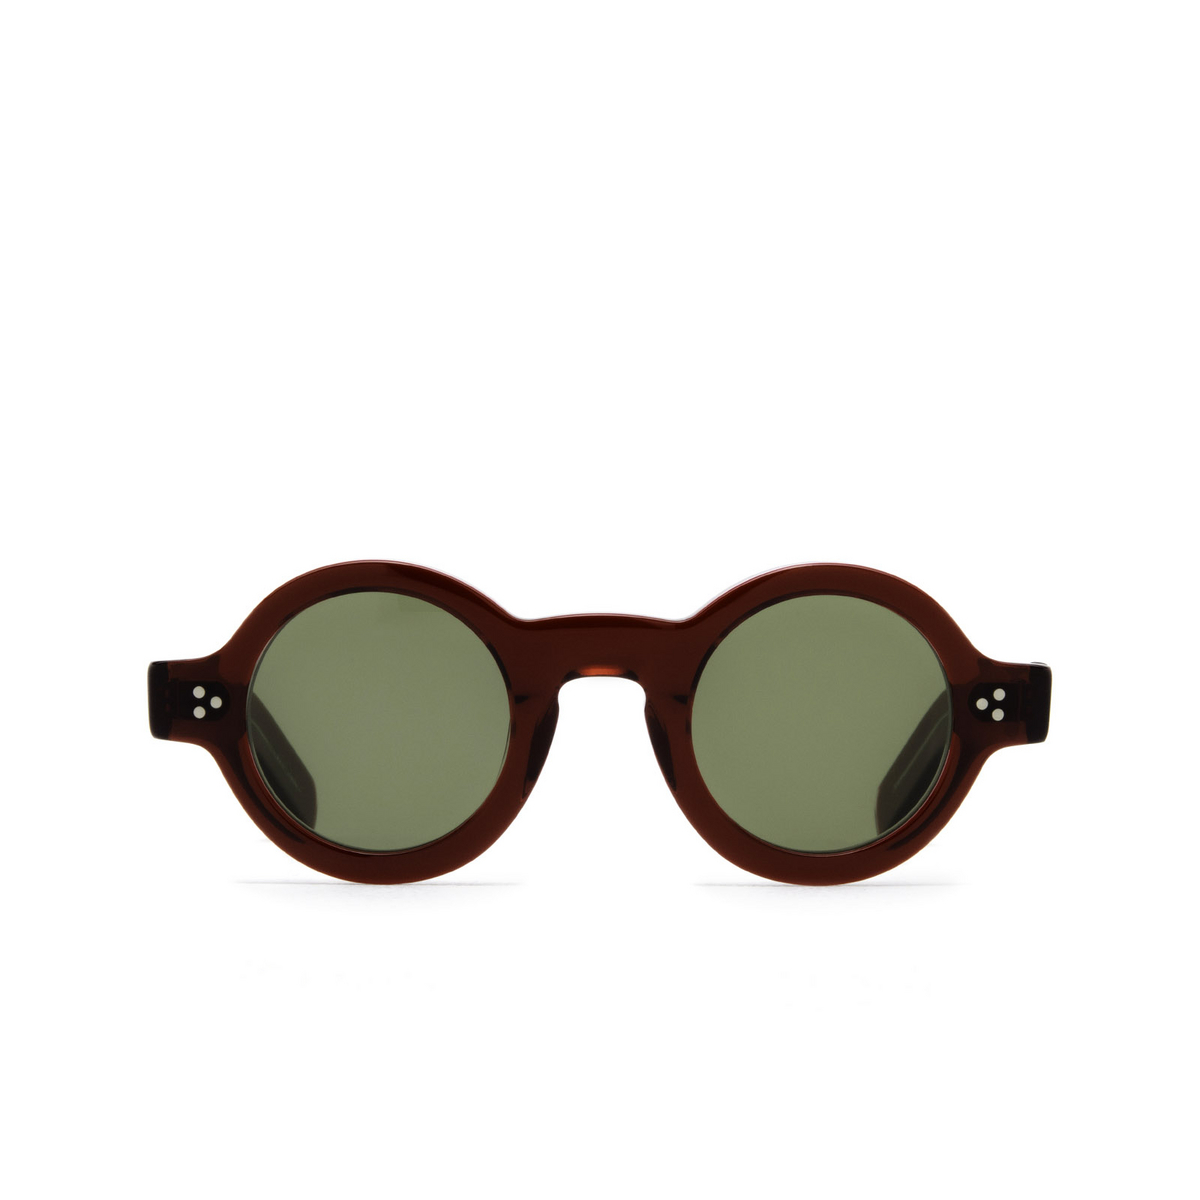 Lesca® Round Sunglasses: Tabu color Red A4 - front view.